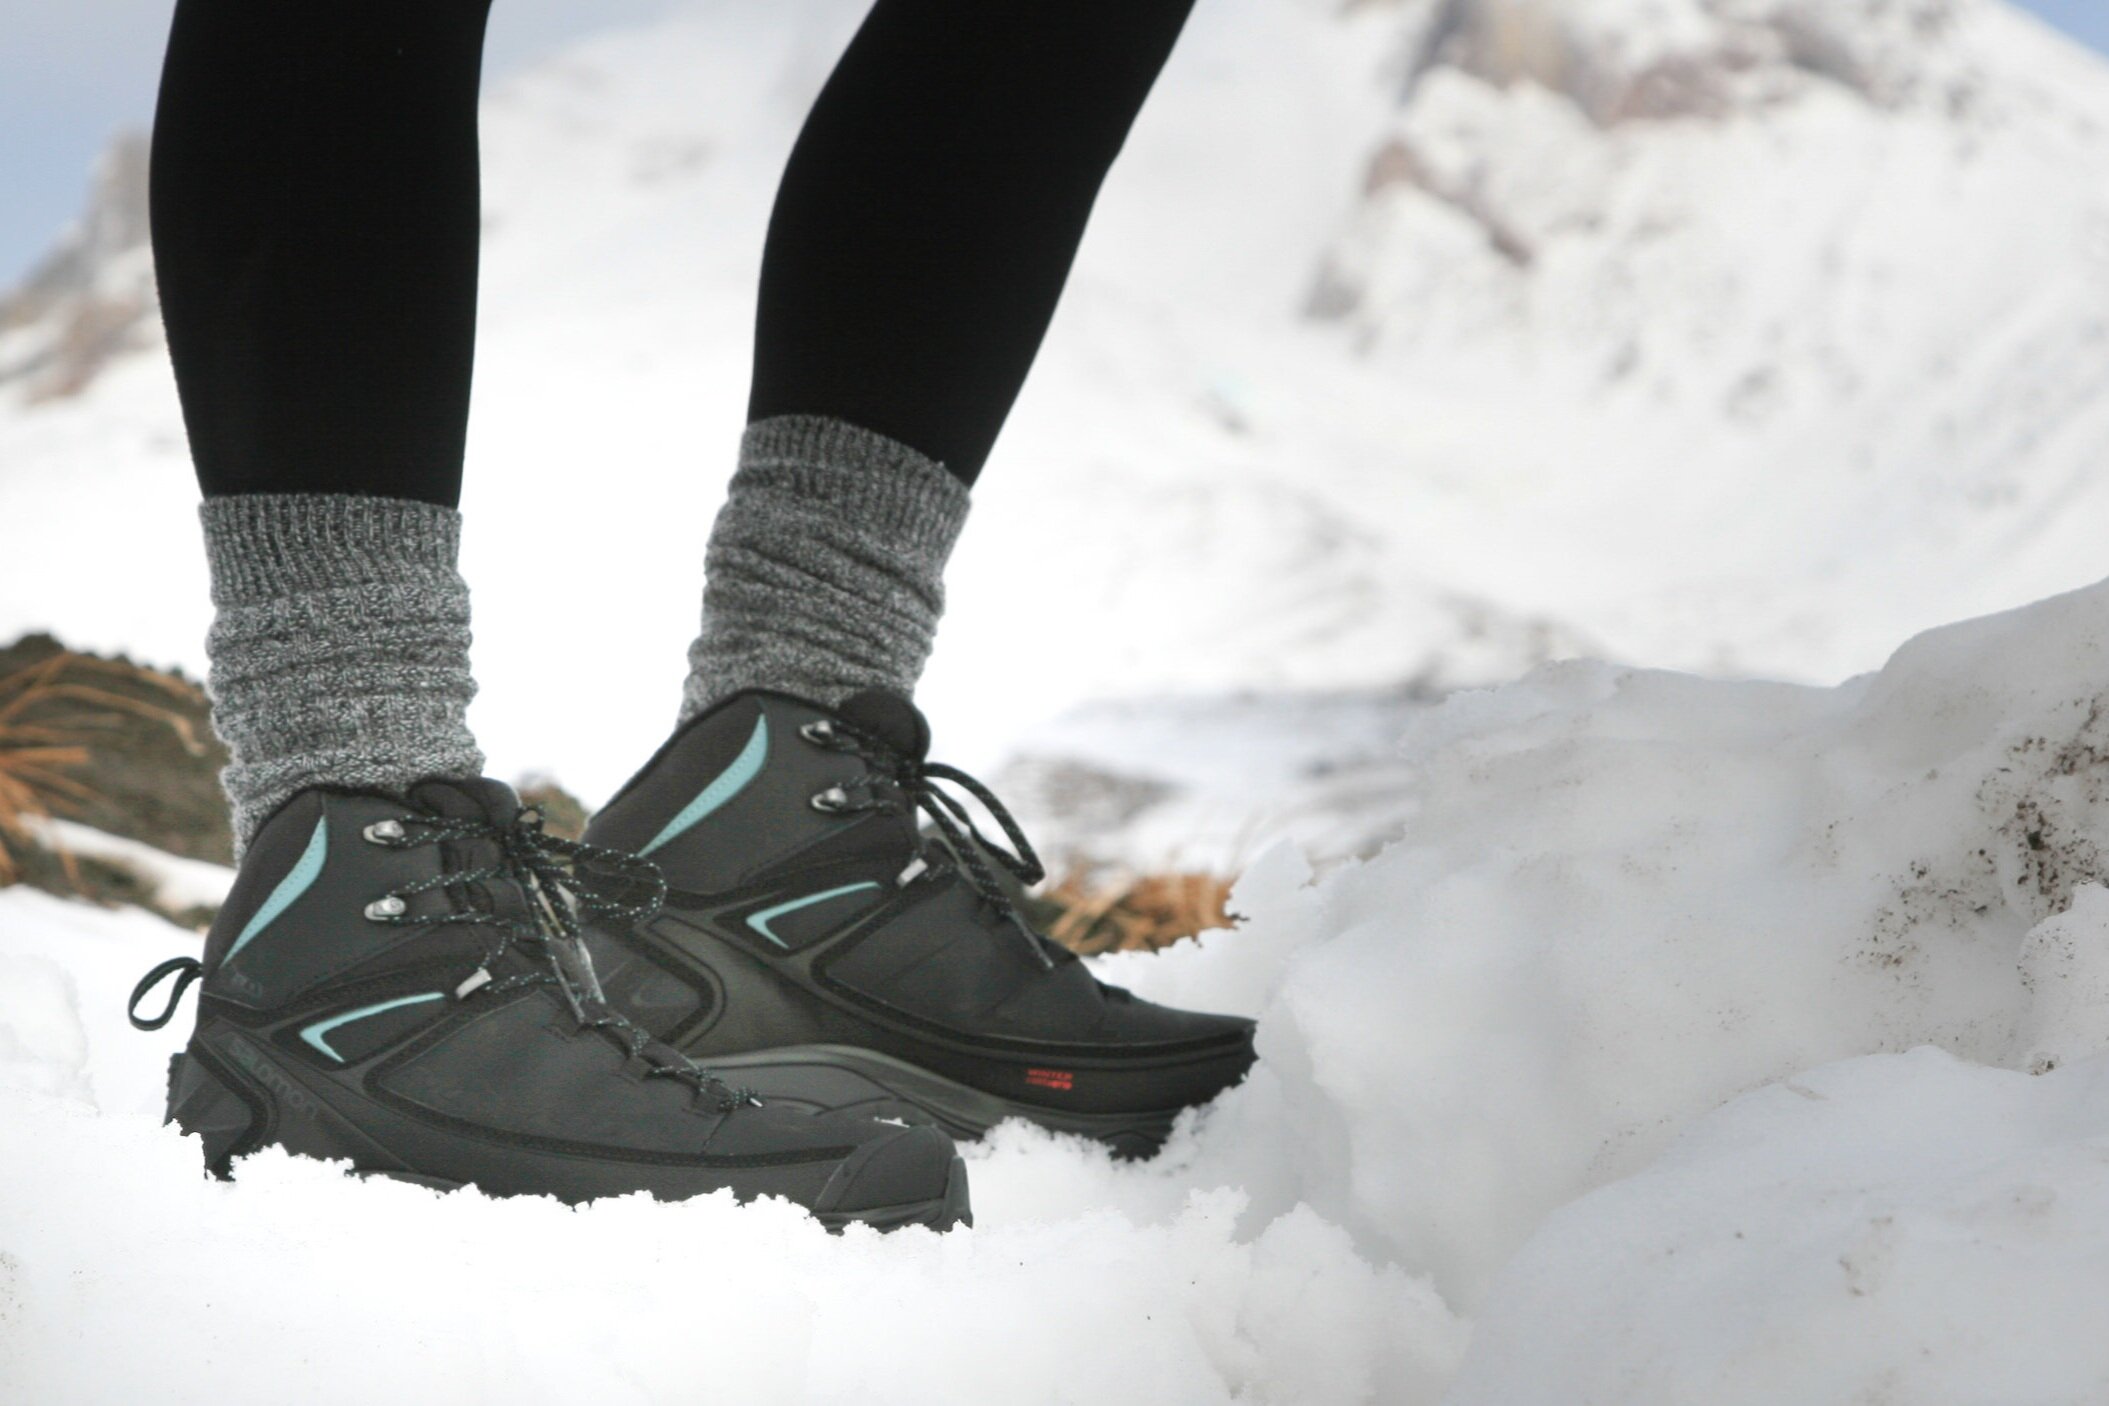 The Salomon X Ultra Mid Winter CS WP Boots are our favorite winter boots for hiking.